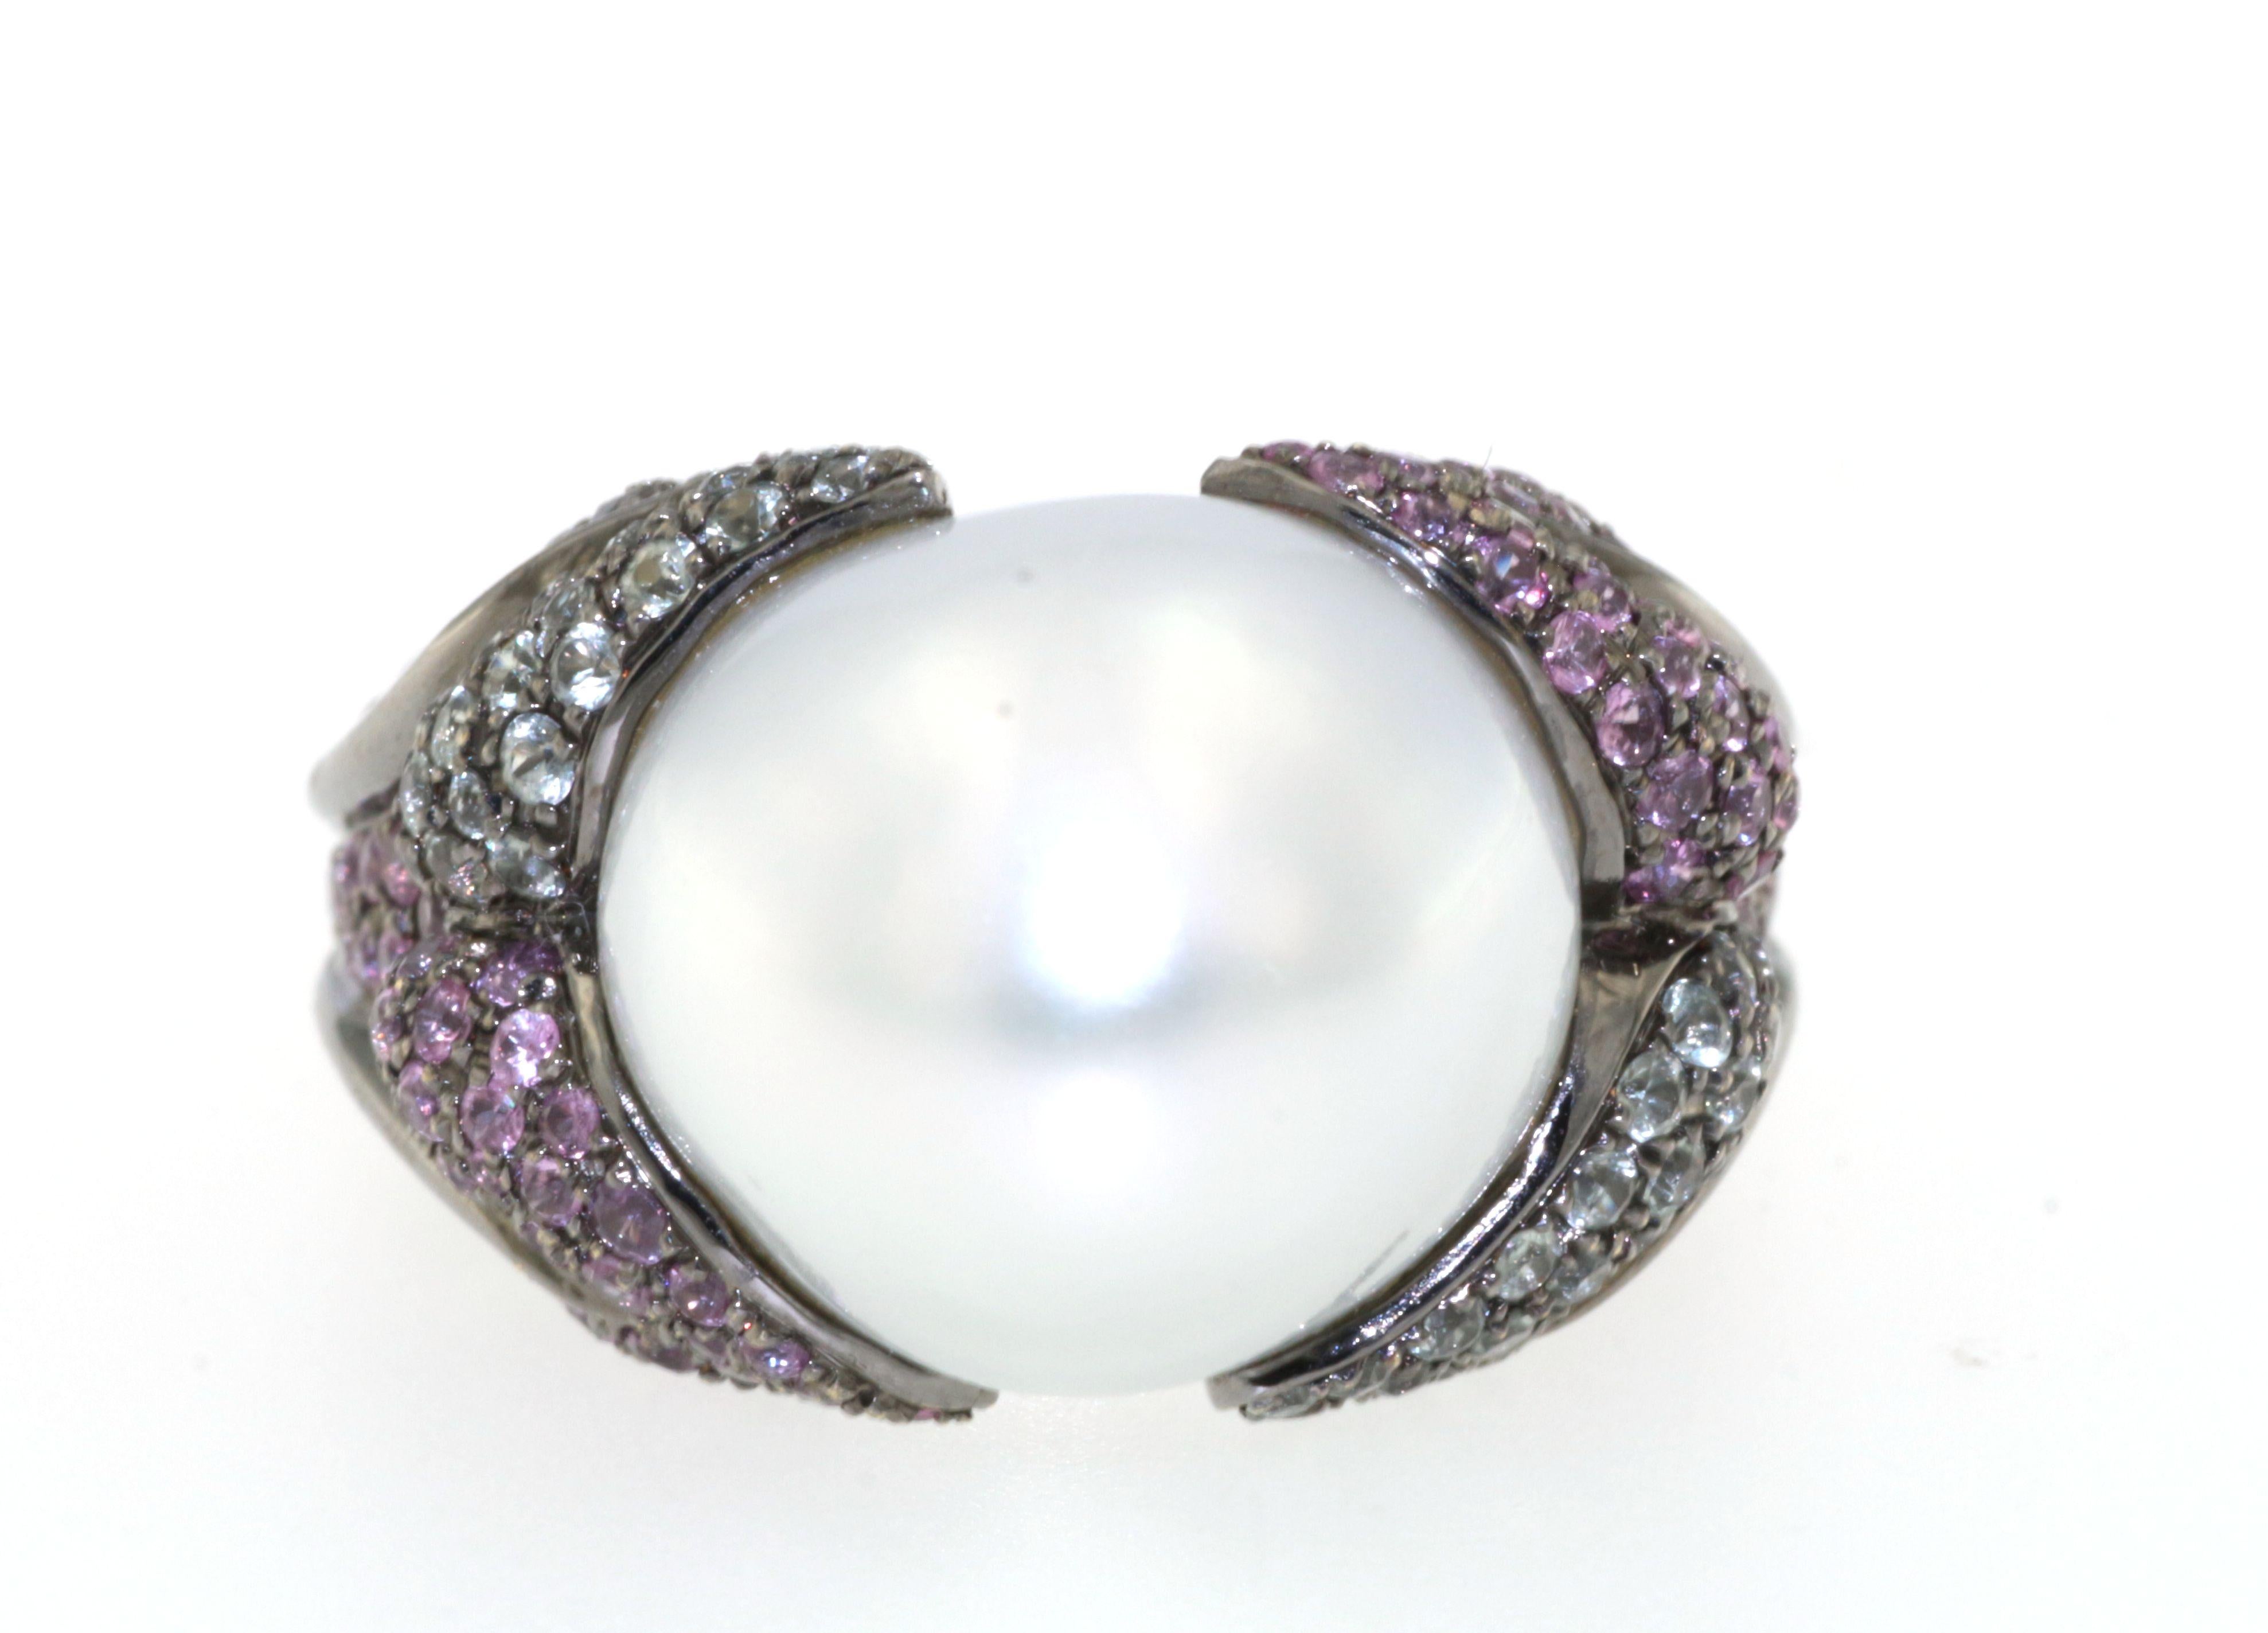 This pearl ring features a 13mm baroque south sea pearl assented with 1.08 carat of green sapphire and 1.18 carat of pink sapphire. The rhodium black gold offers a great contrast with the white baroque pearl, it's definitely a eye-catcher piece.